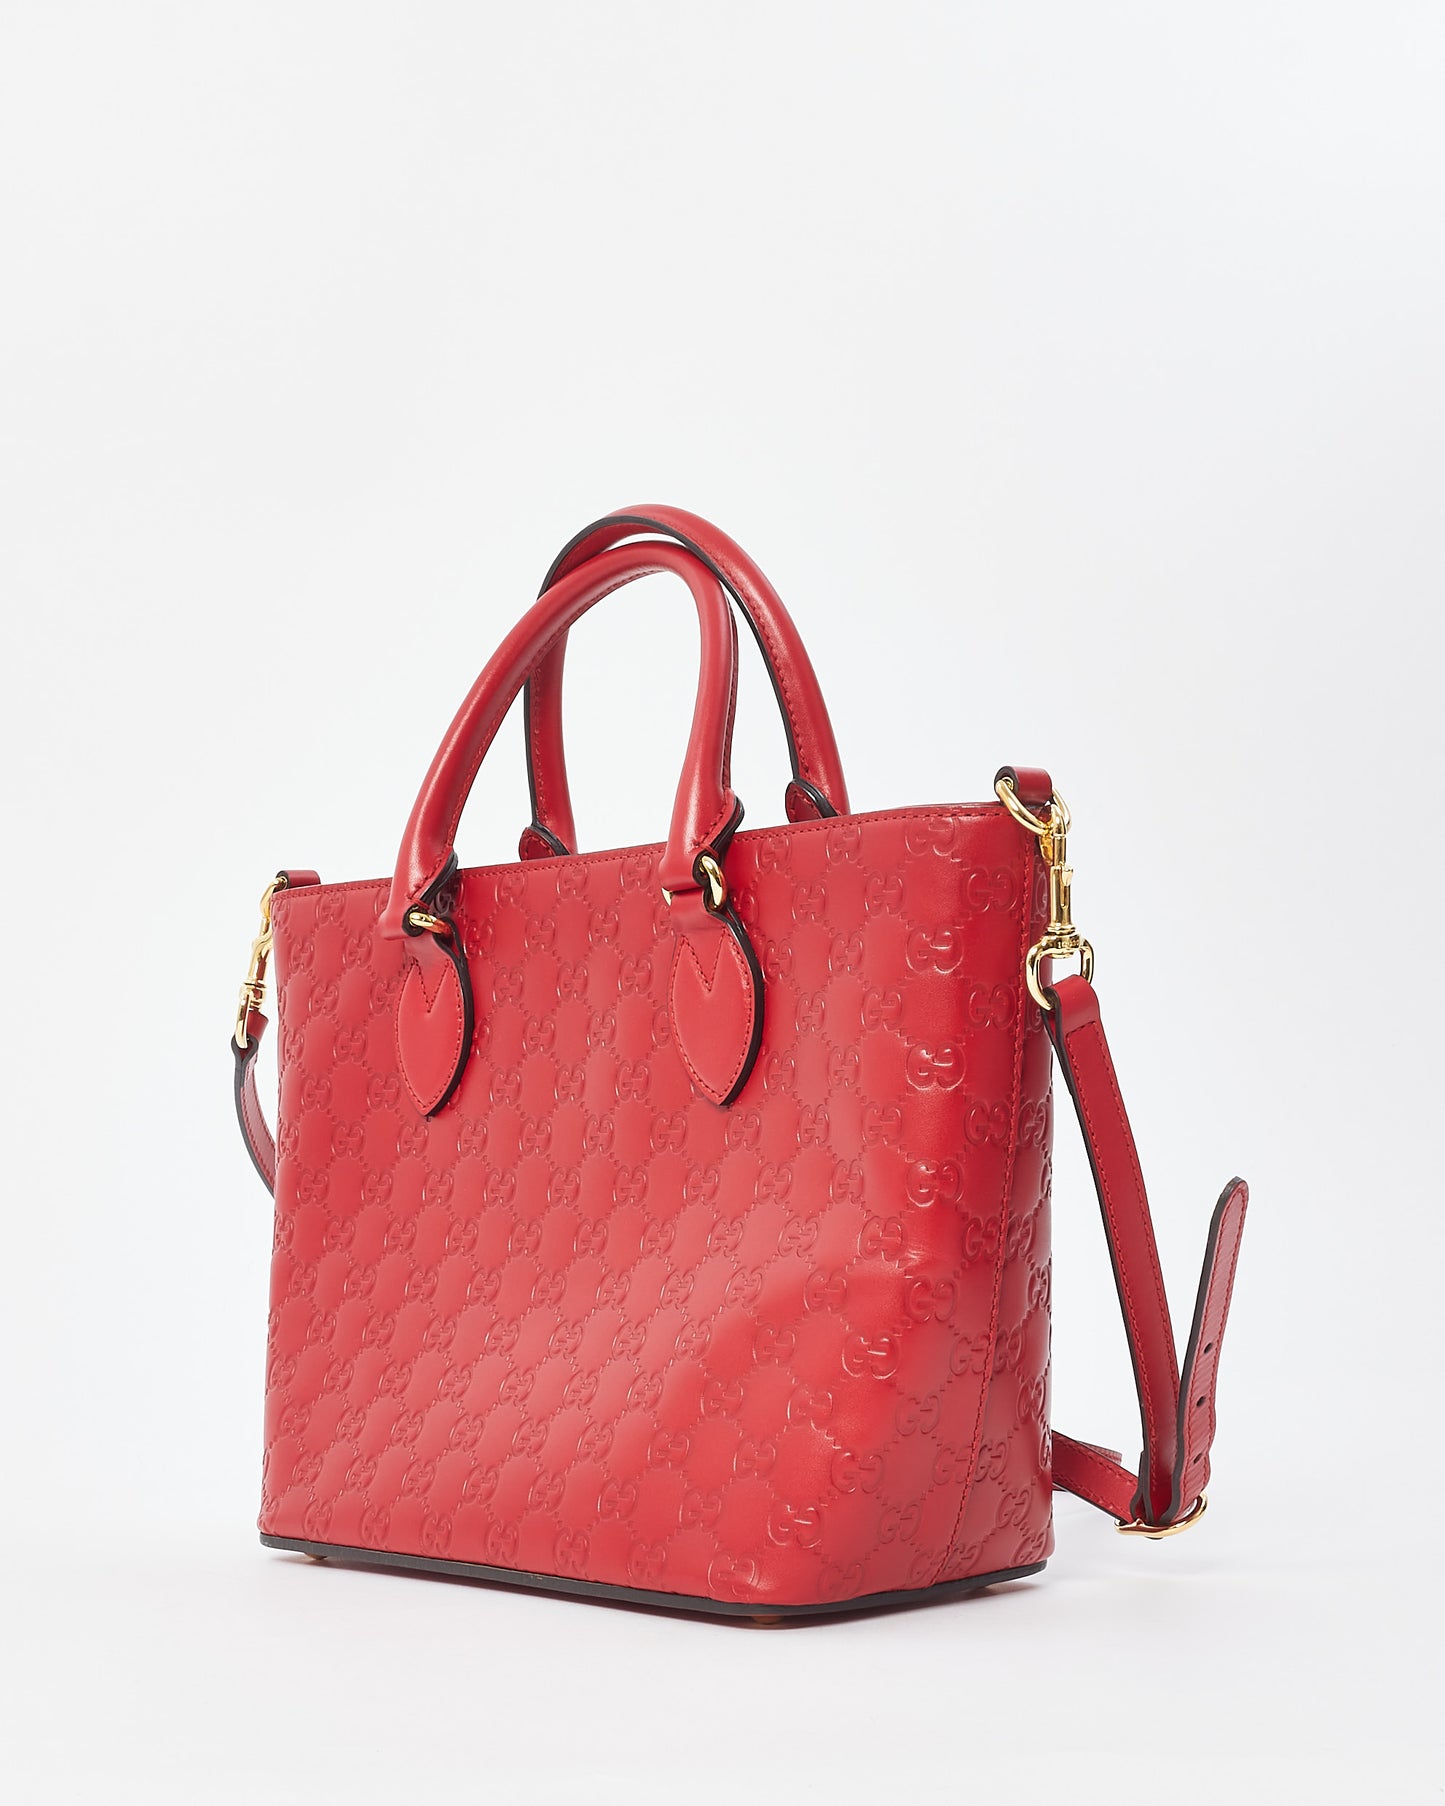 Gucci Red GG Signature G Monogram Leather Top Handle Bag